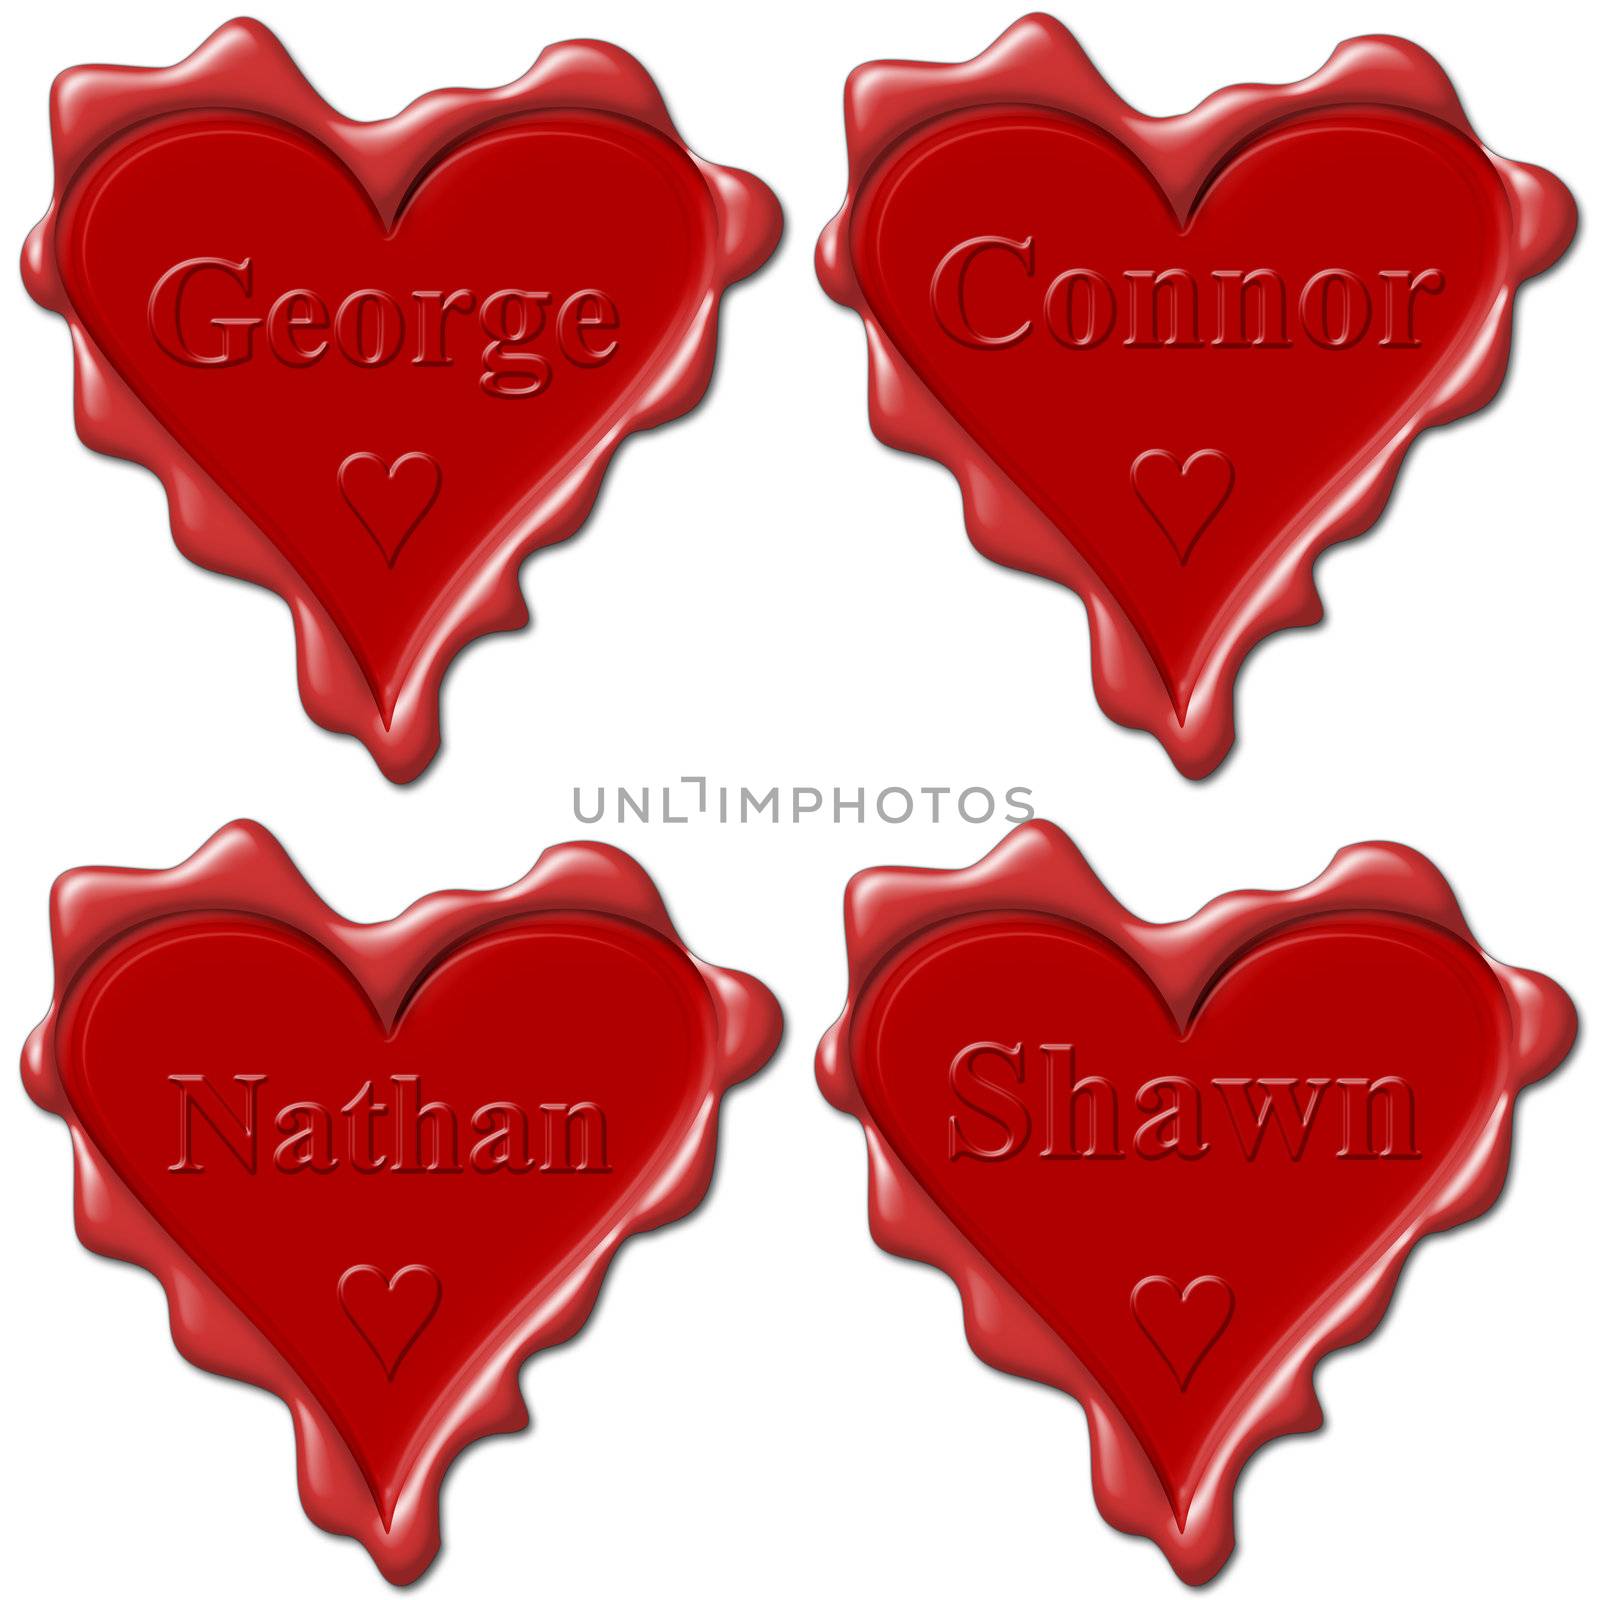 Valentine love hearts with names: George, Connor, Nathan, Shawn, by mozzyb